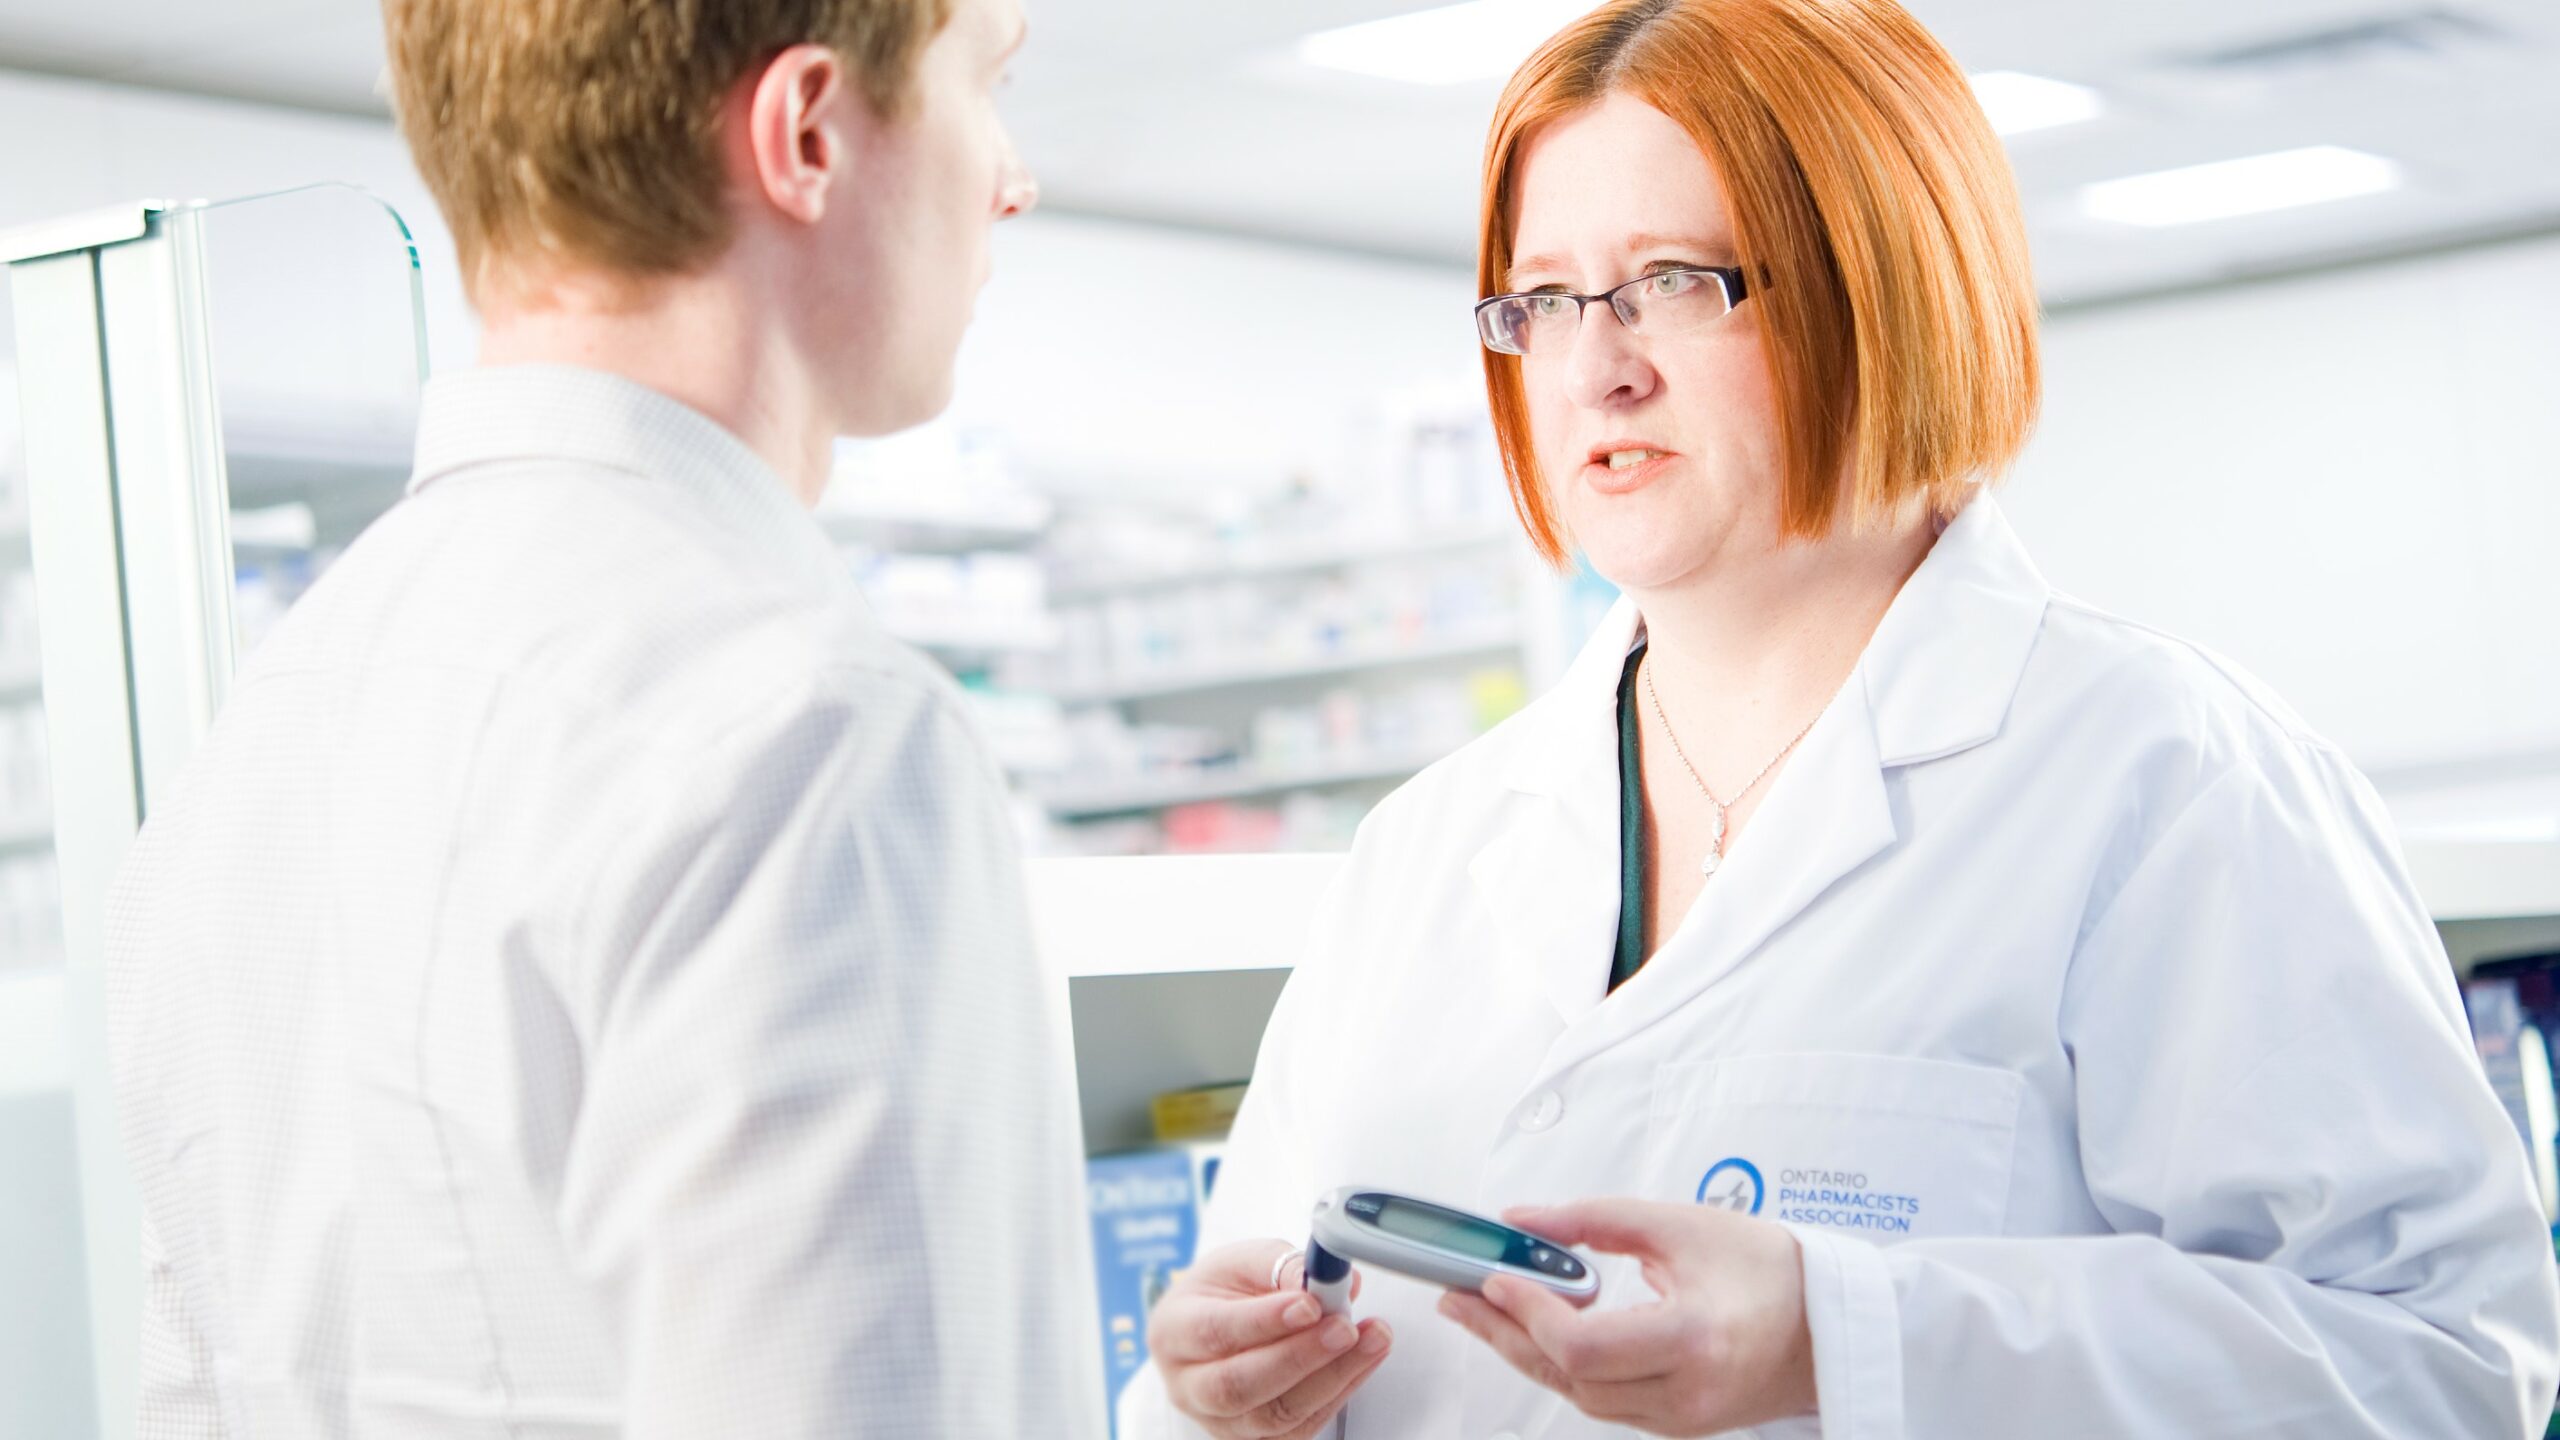 Medical Device Training for Pharmacy Technicians